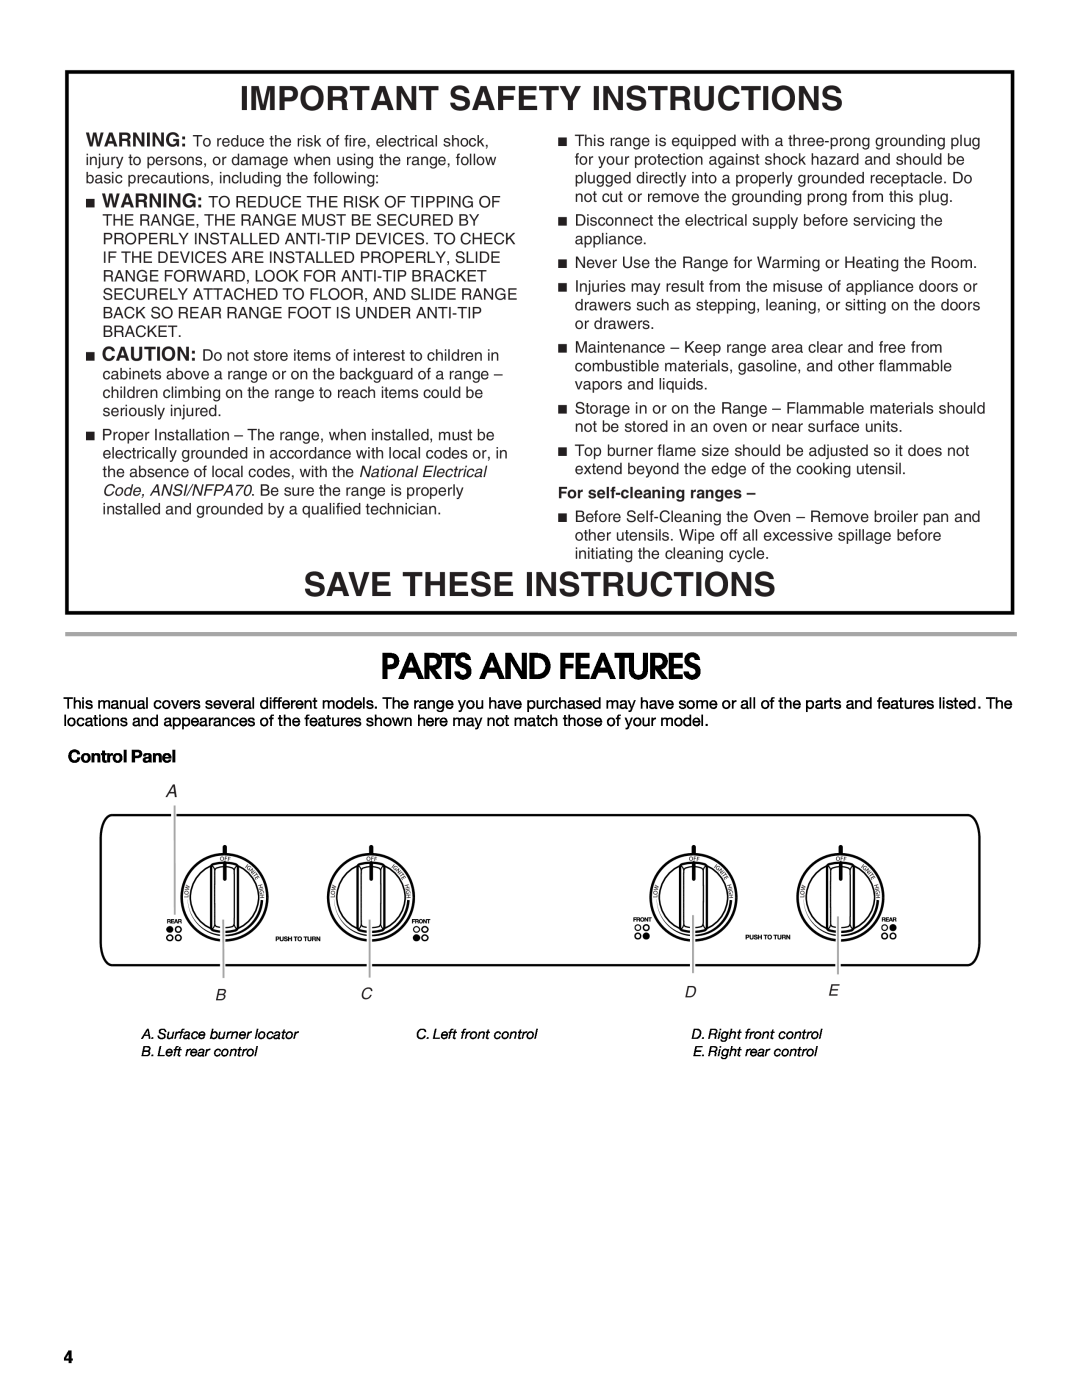 Whirlpool TGS325MQ3 manual Parts And Features, Important Safety Instructions, Save These Instructions, Control Panel 